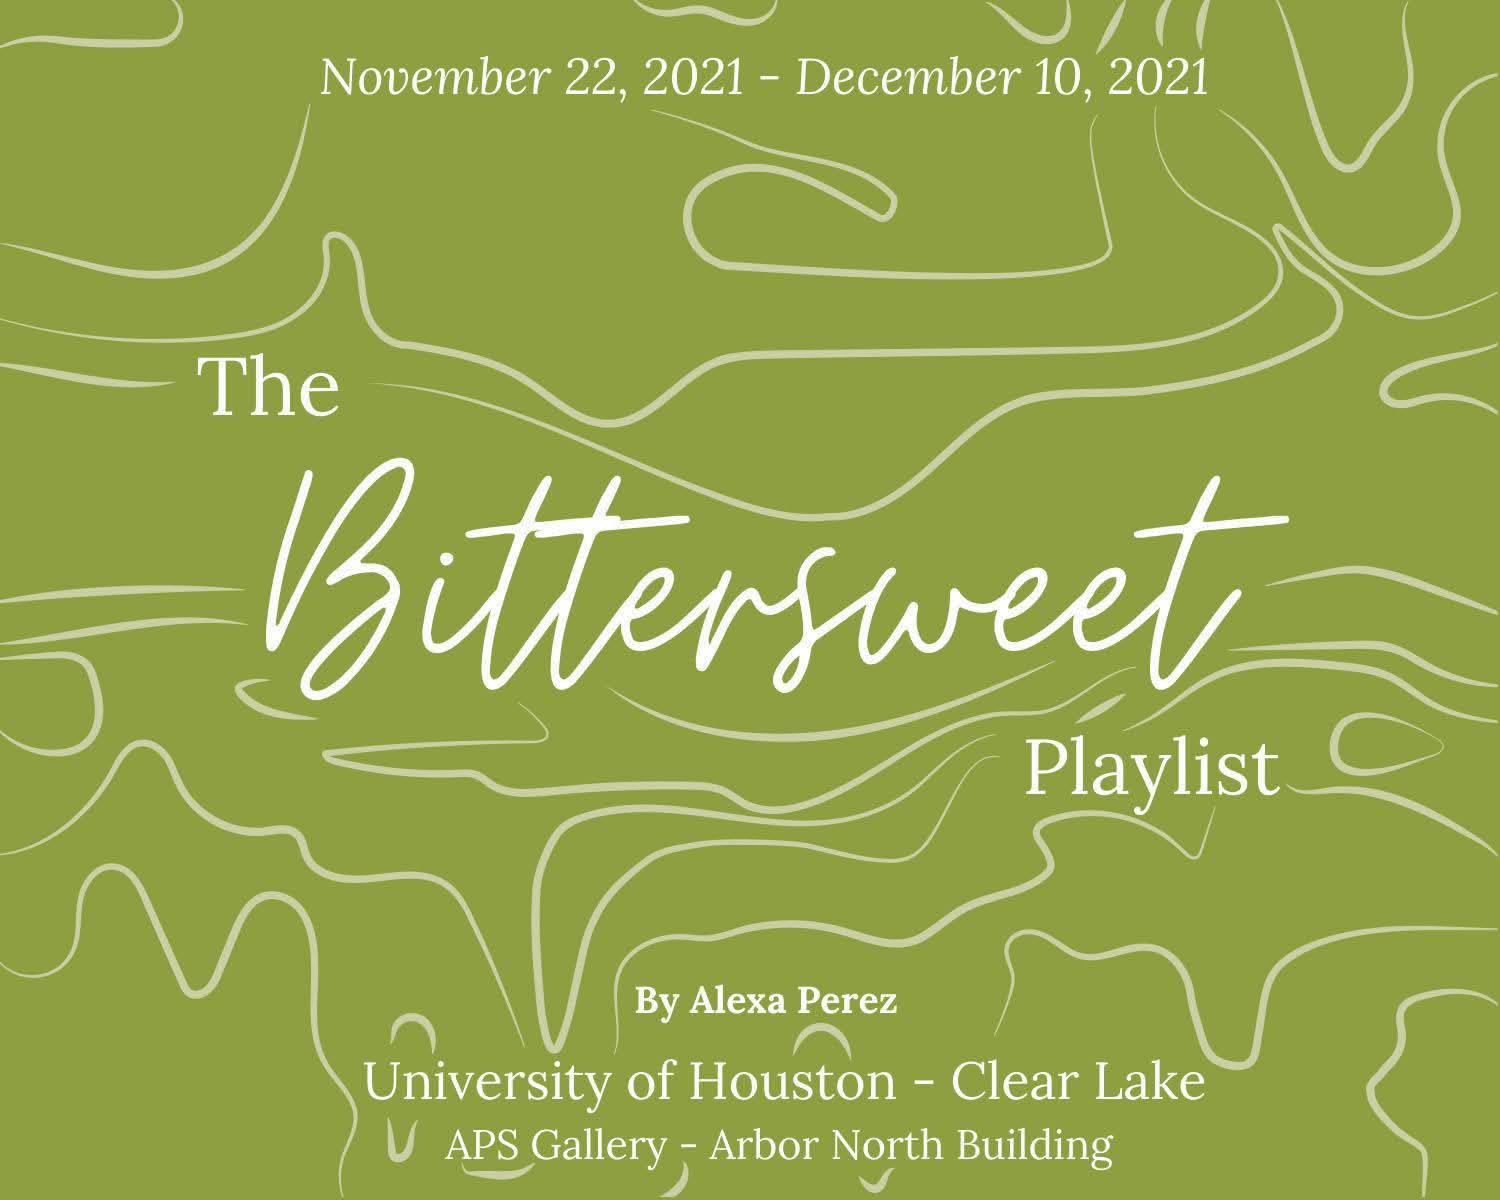 GRAPHIC: "The Bittersweet Playlist" exhibition will take place in the Arbor North building at UHCL from Nov. 23 to Dec. 10. Graphic courtesy of Alexa Perez.